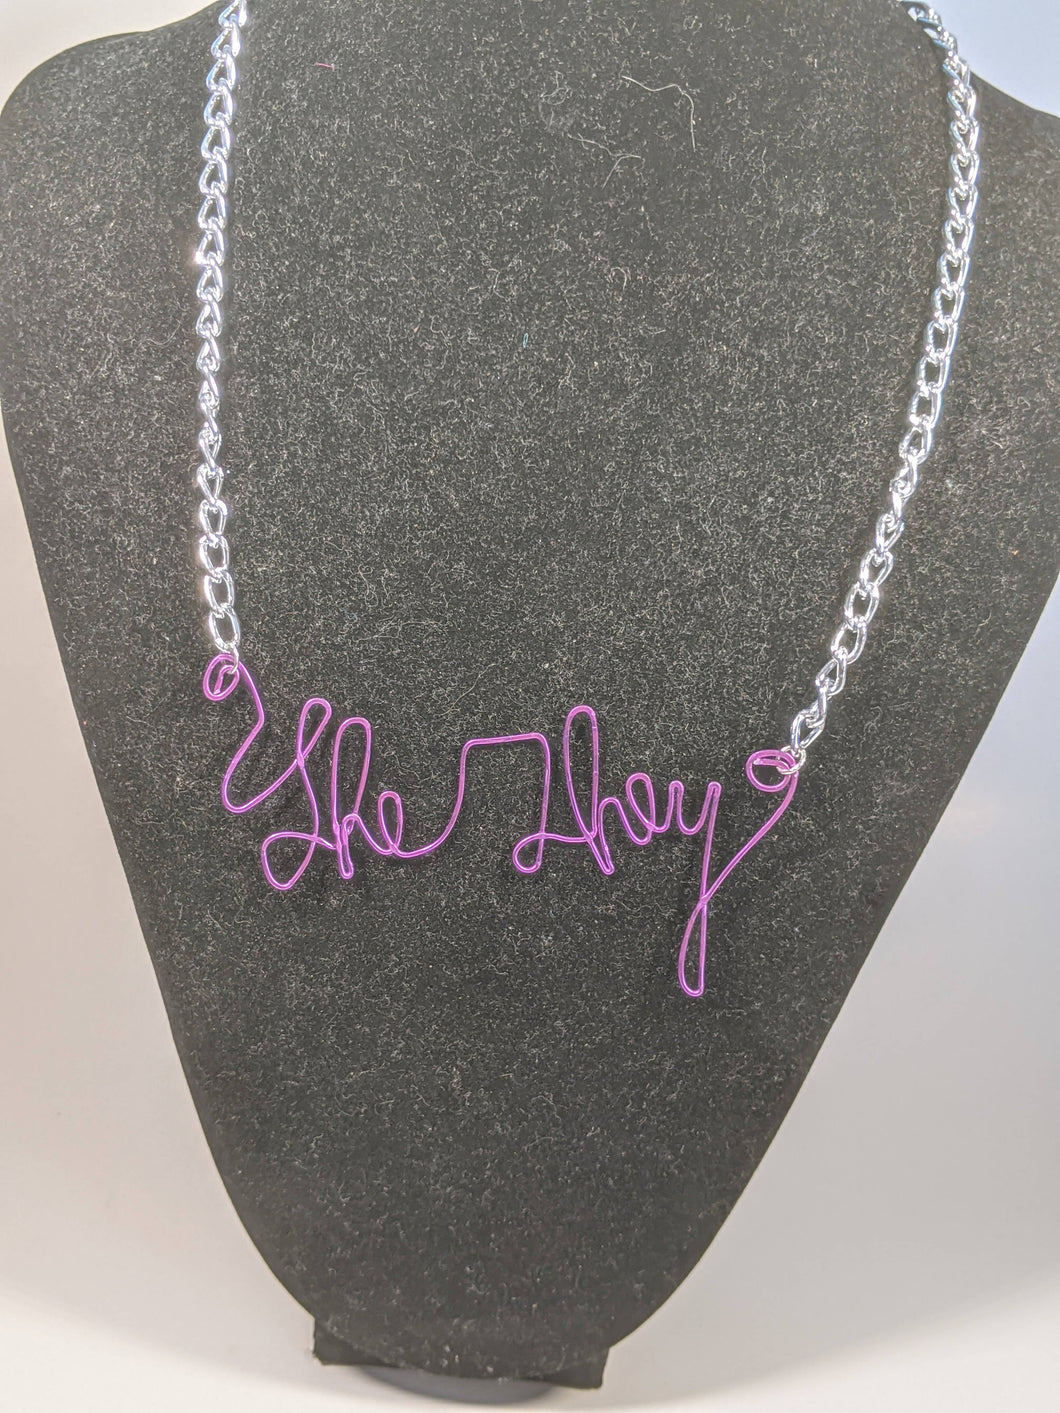 She/They Talisman Necklace - Purple